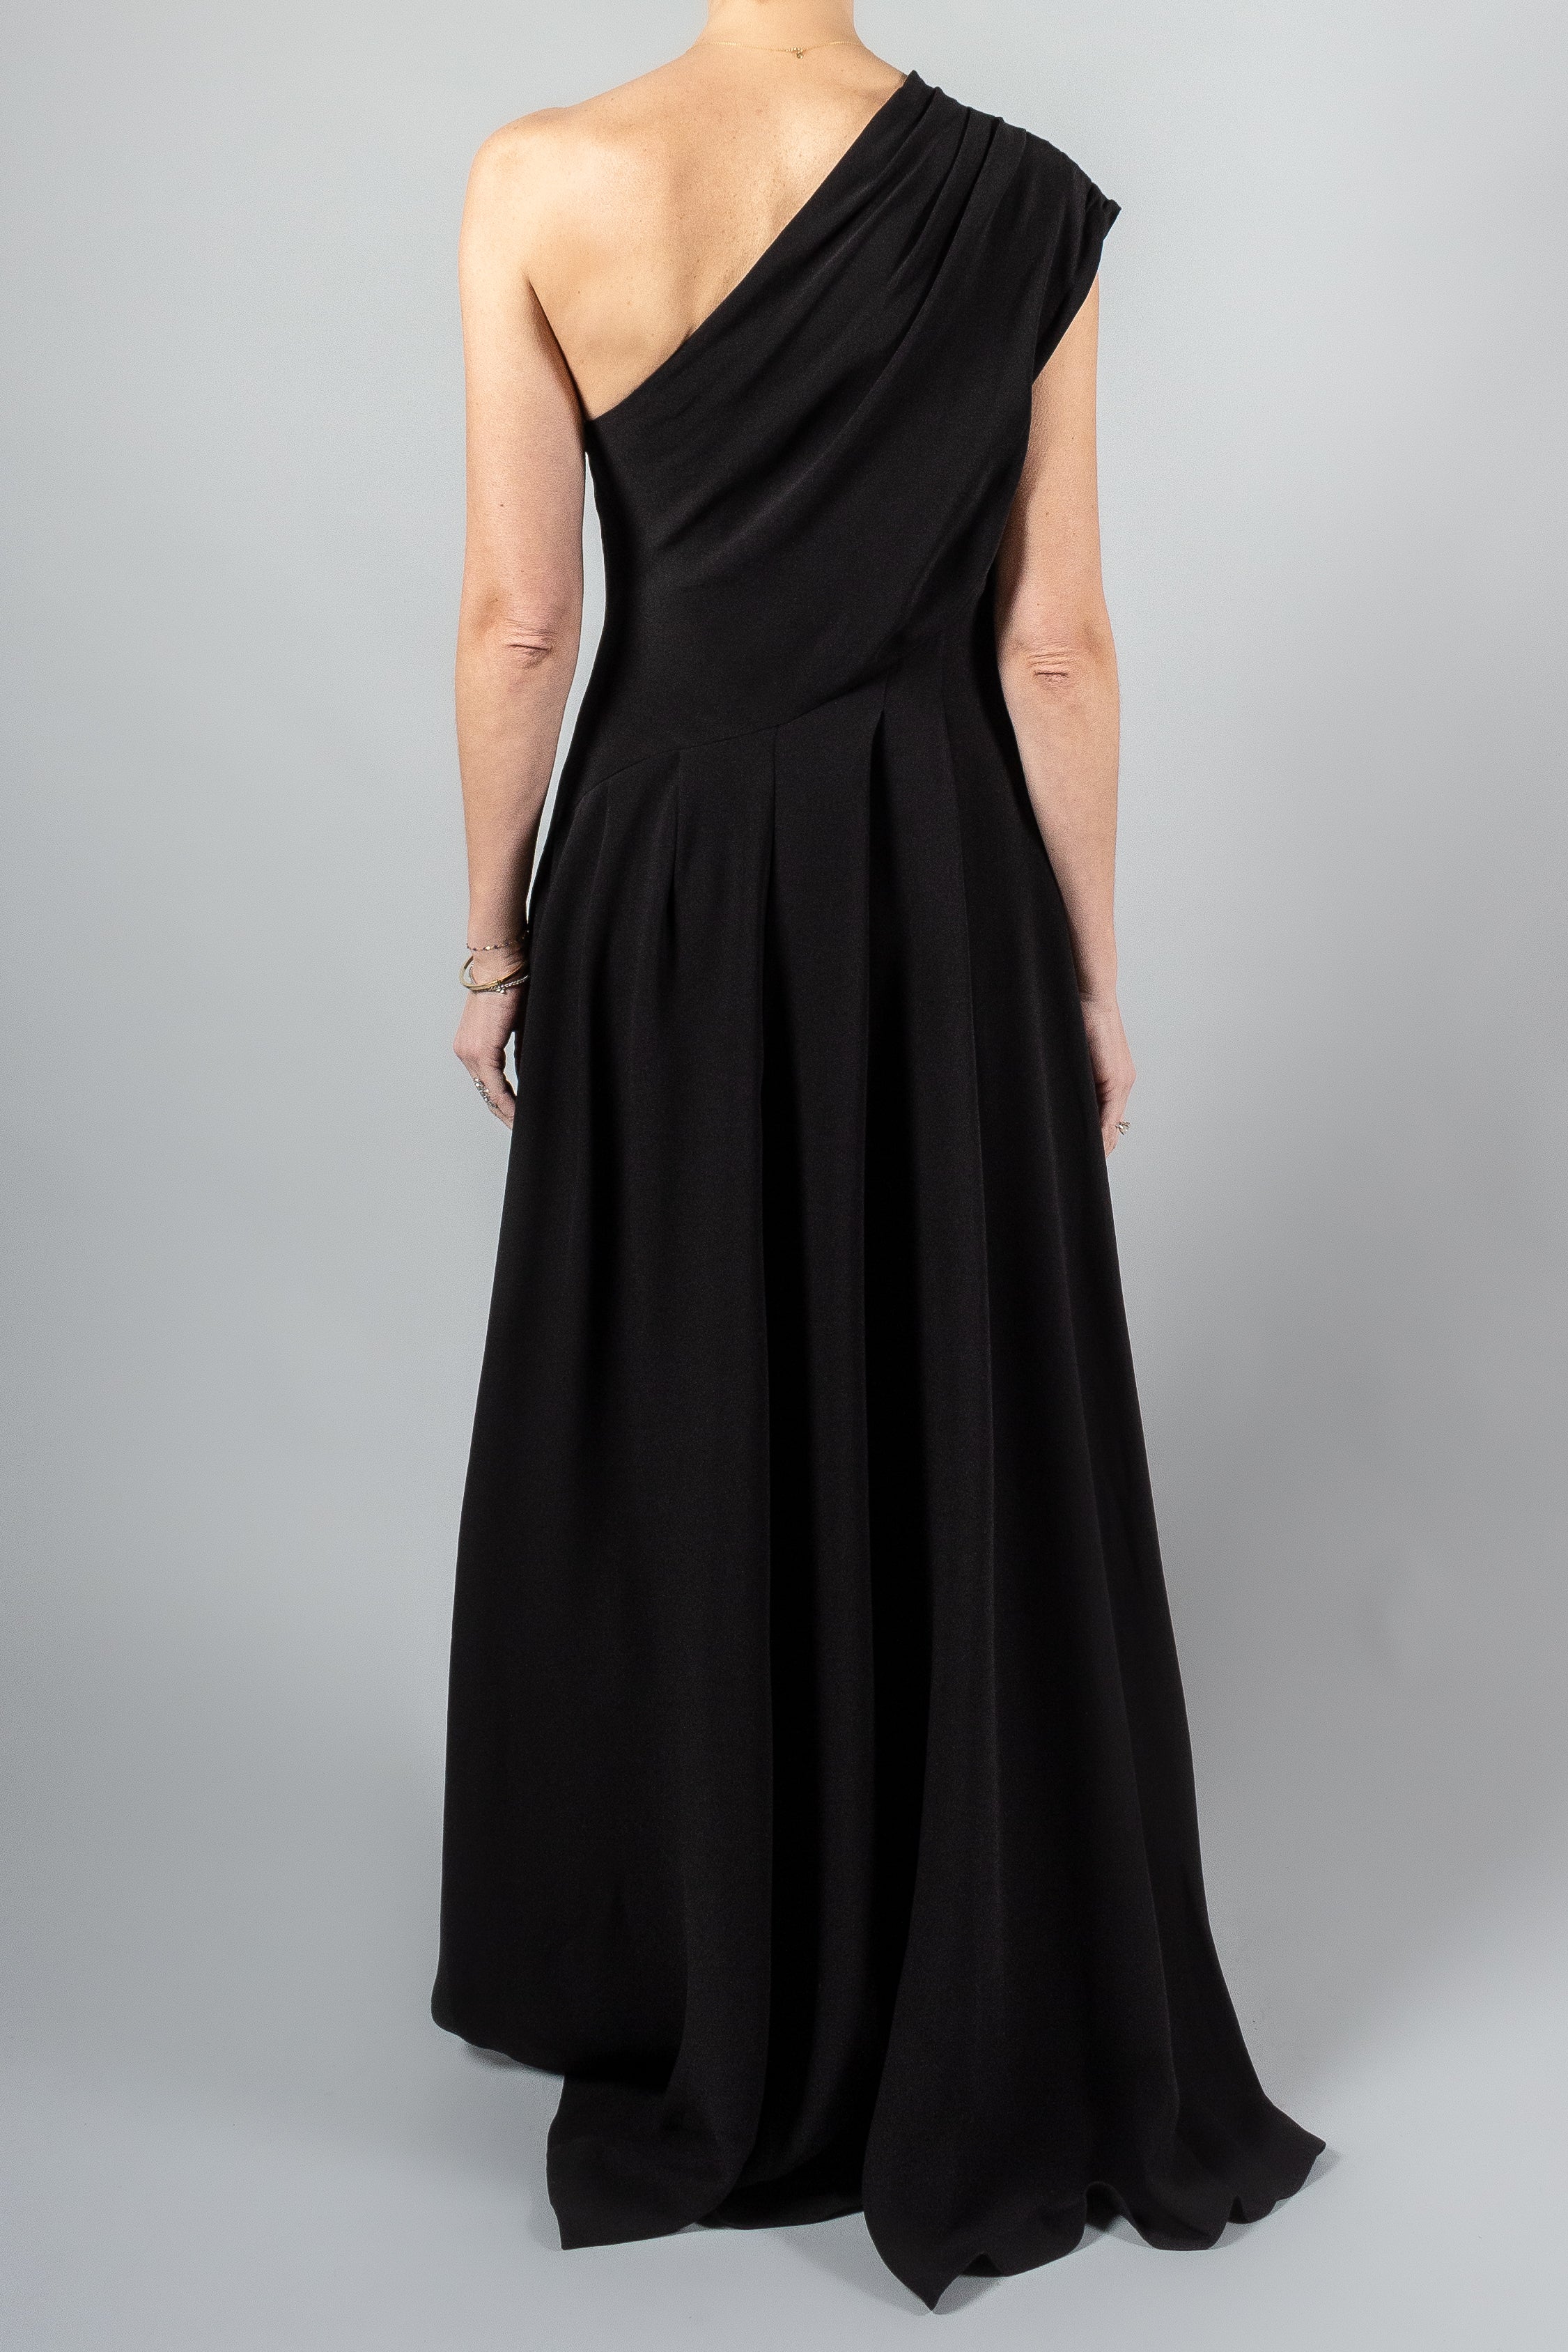 Heirlome Sara Dress-Dresses and Jumpsuits-Misch-Boutique-Vancouver-Canada-misch.ca